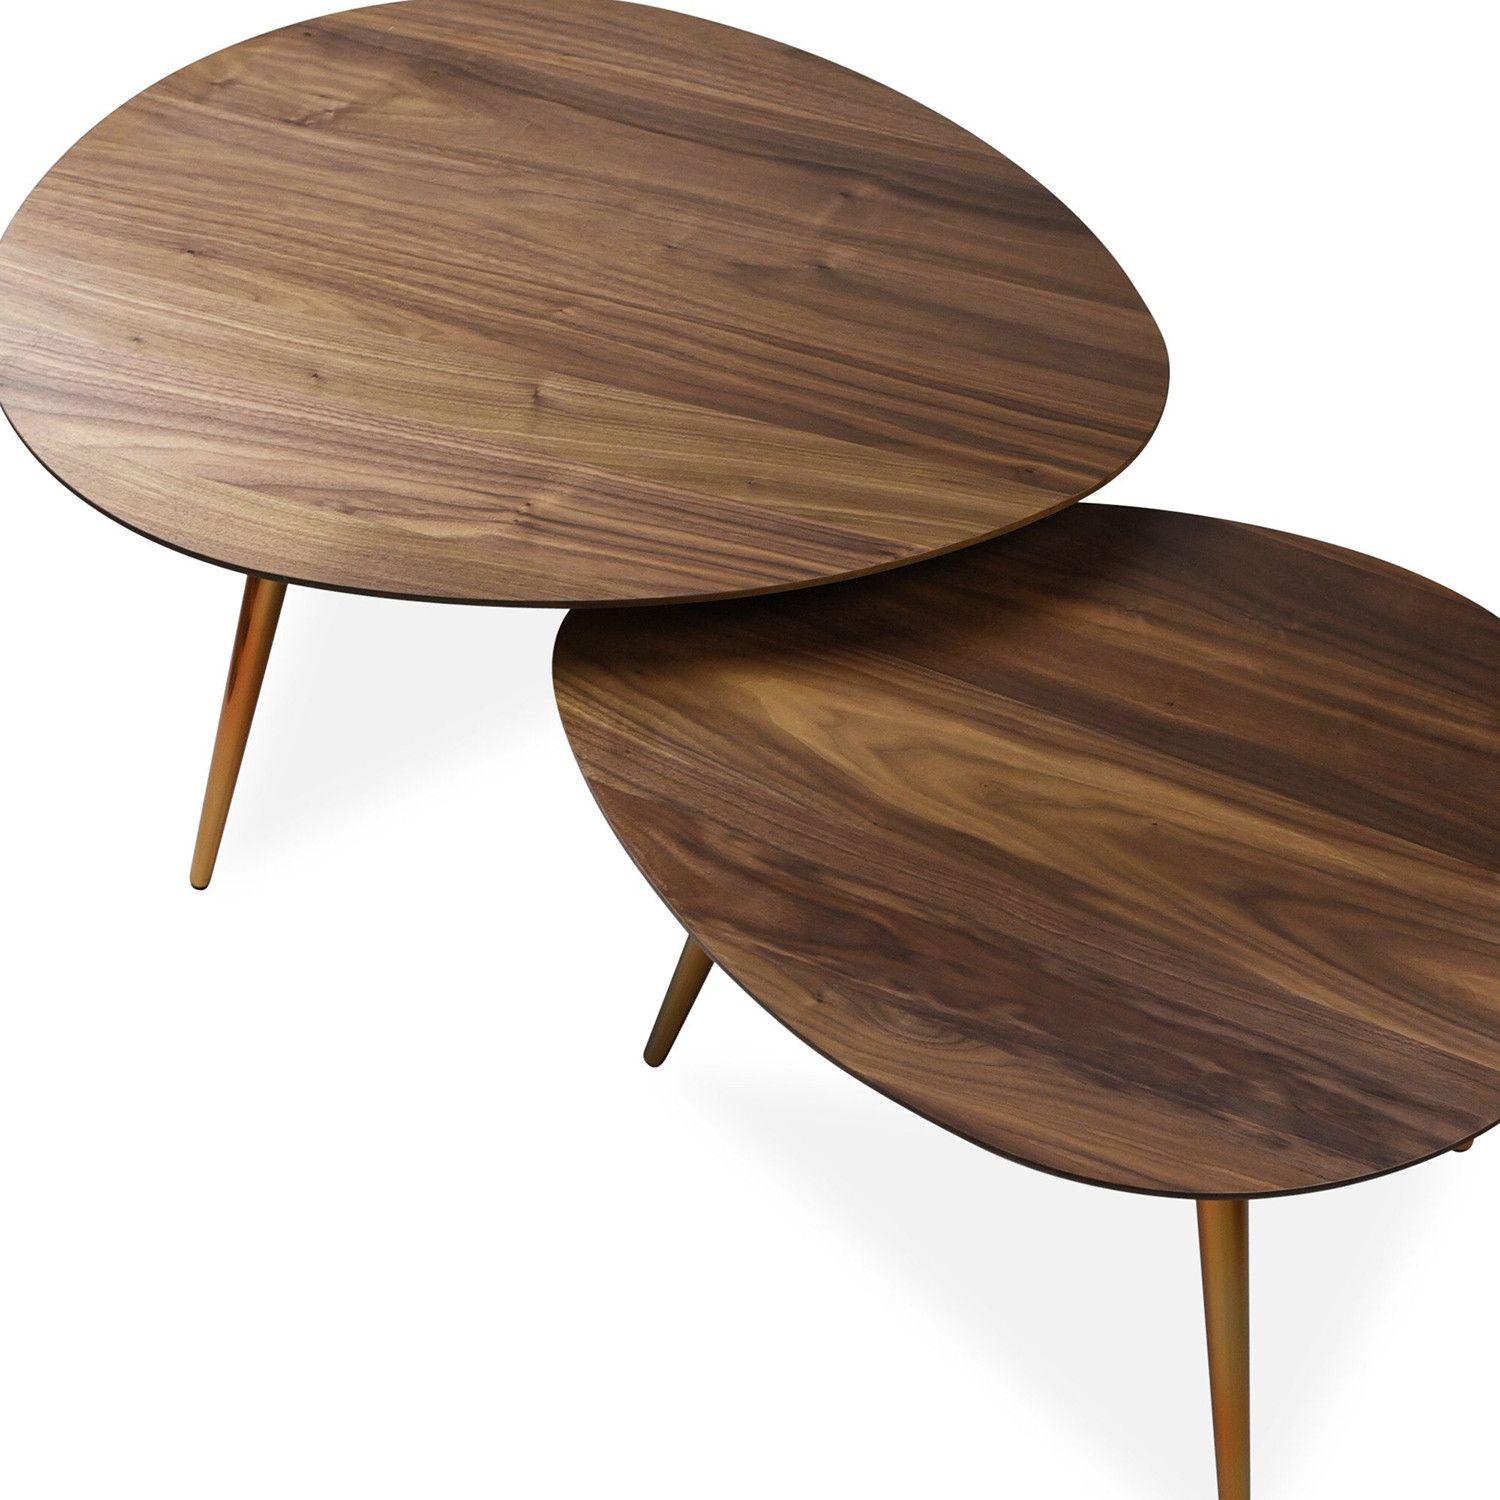 Maddox Mid Century Modern Nesting Coffee Table Set – Edloe Finch For Modern Nesting Coffee Tables (View 9 of 15)